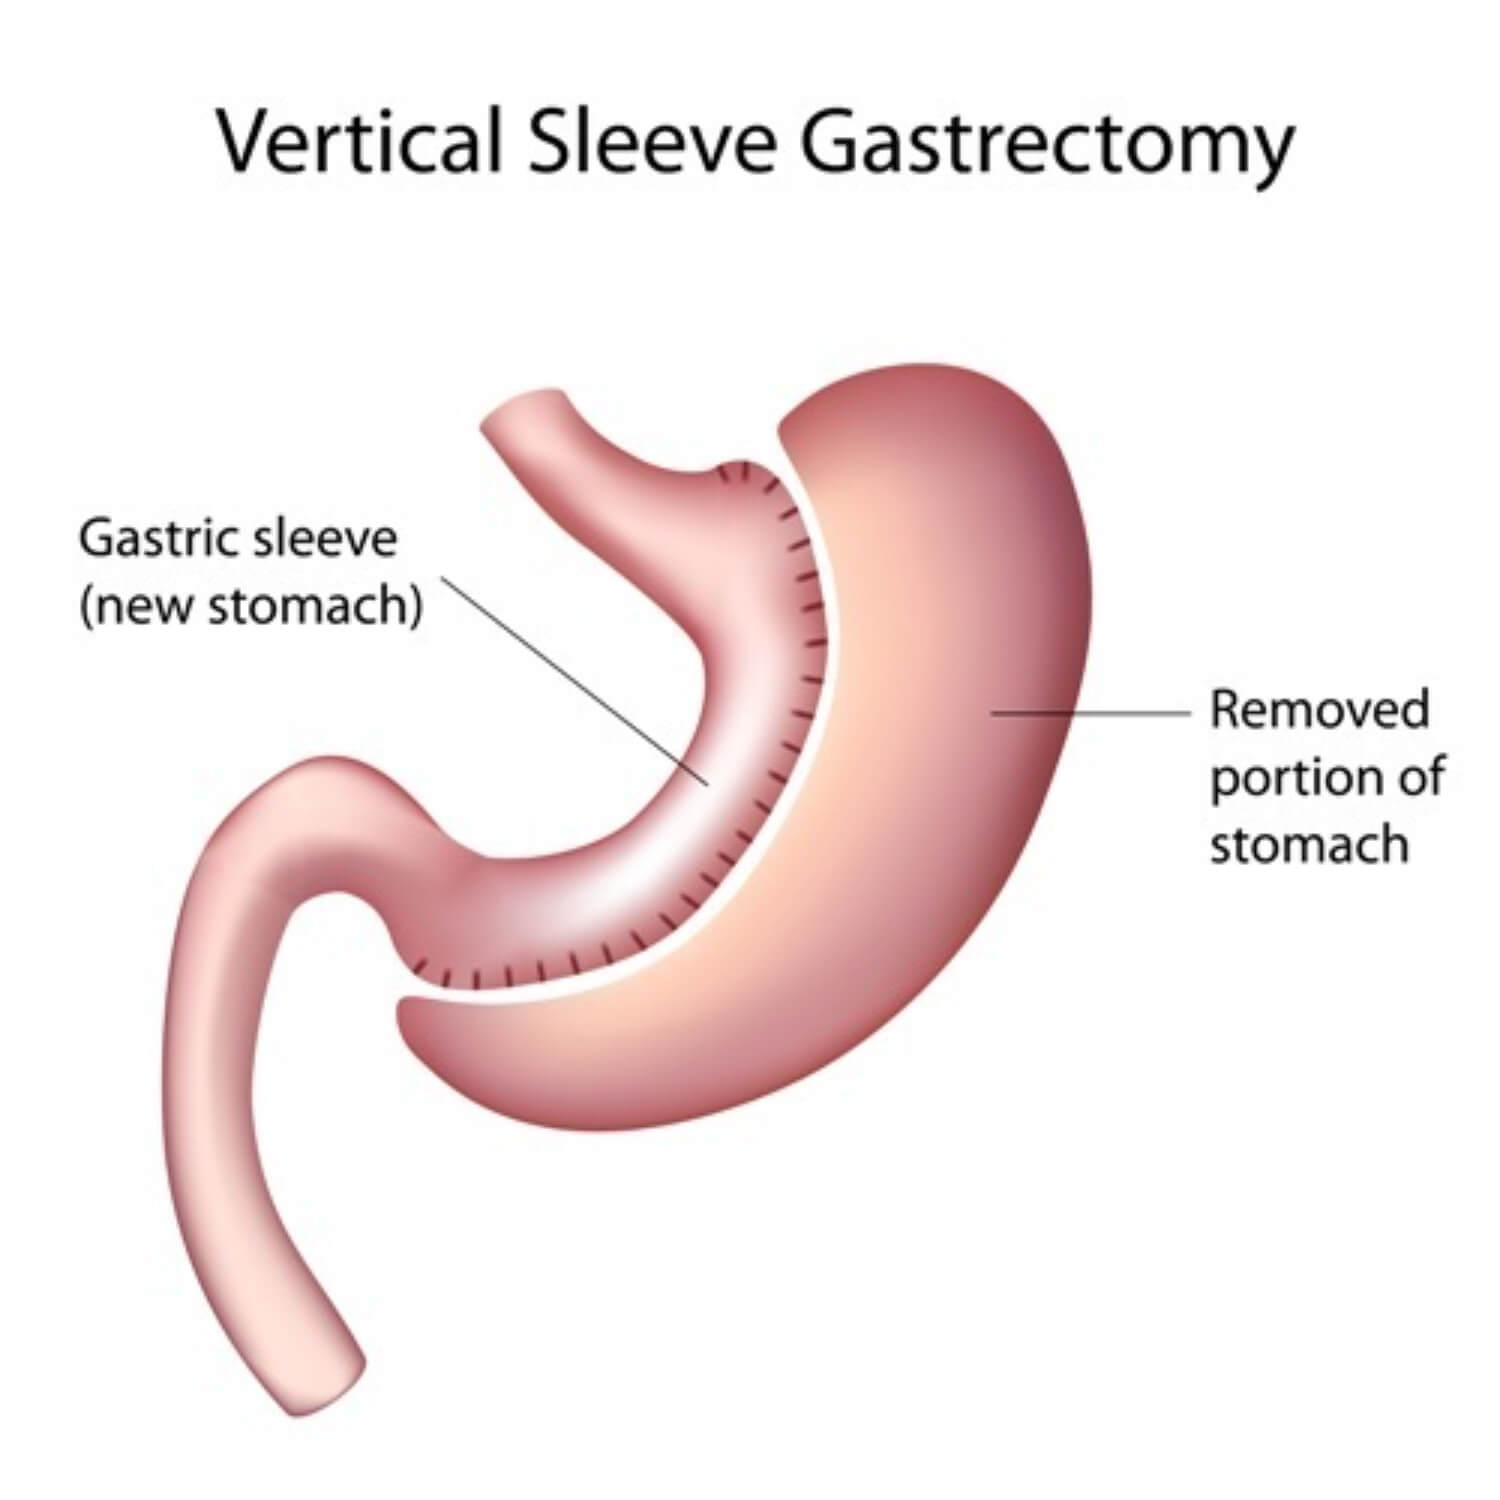 Vertical sleeve gastrectomy from bariatric surgeons in tennessee